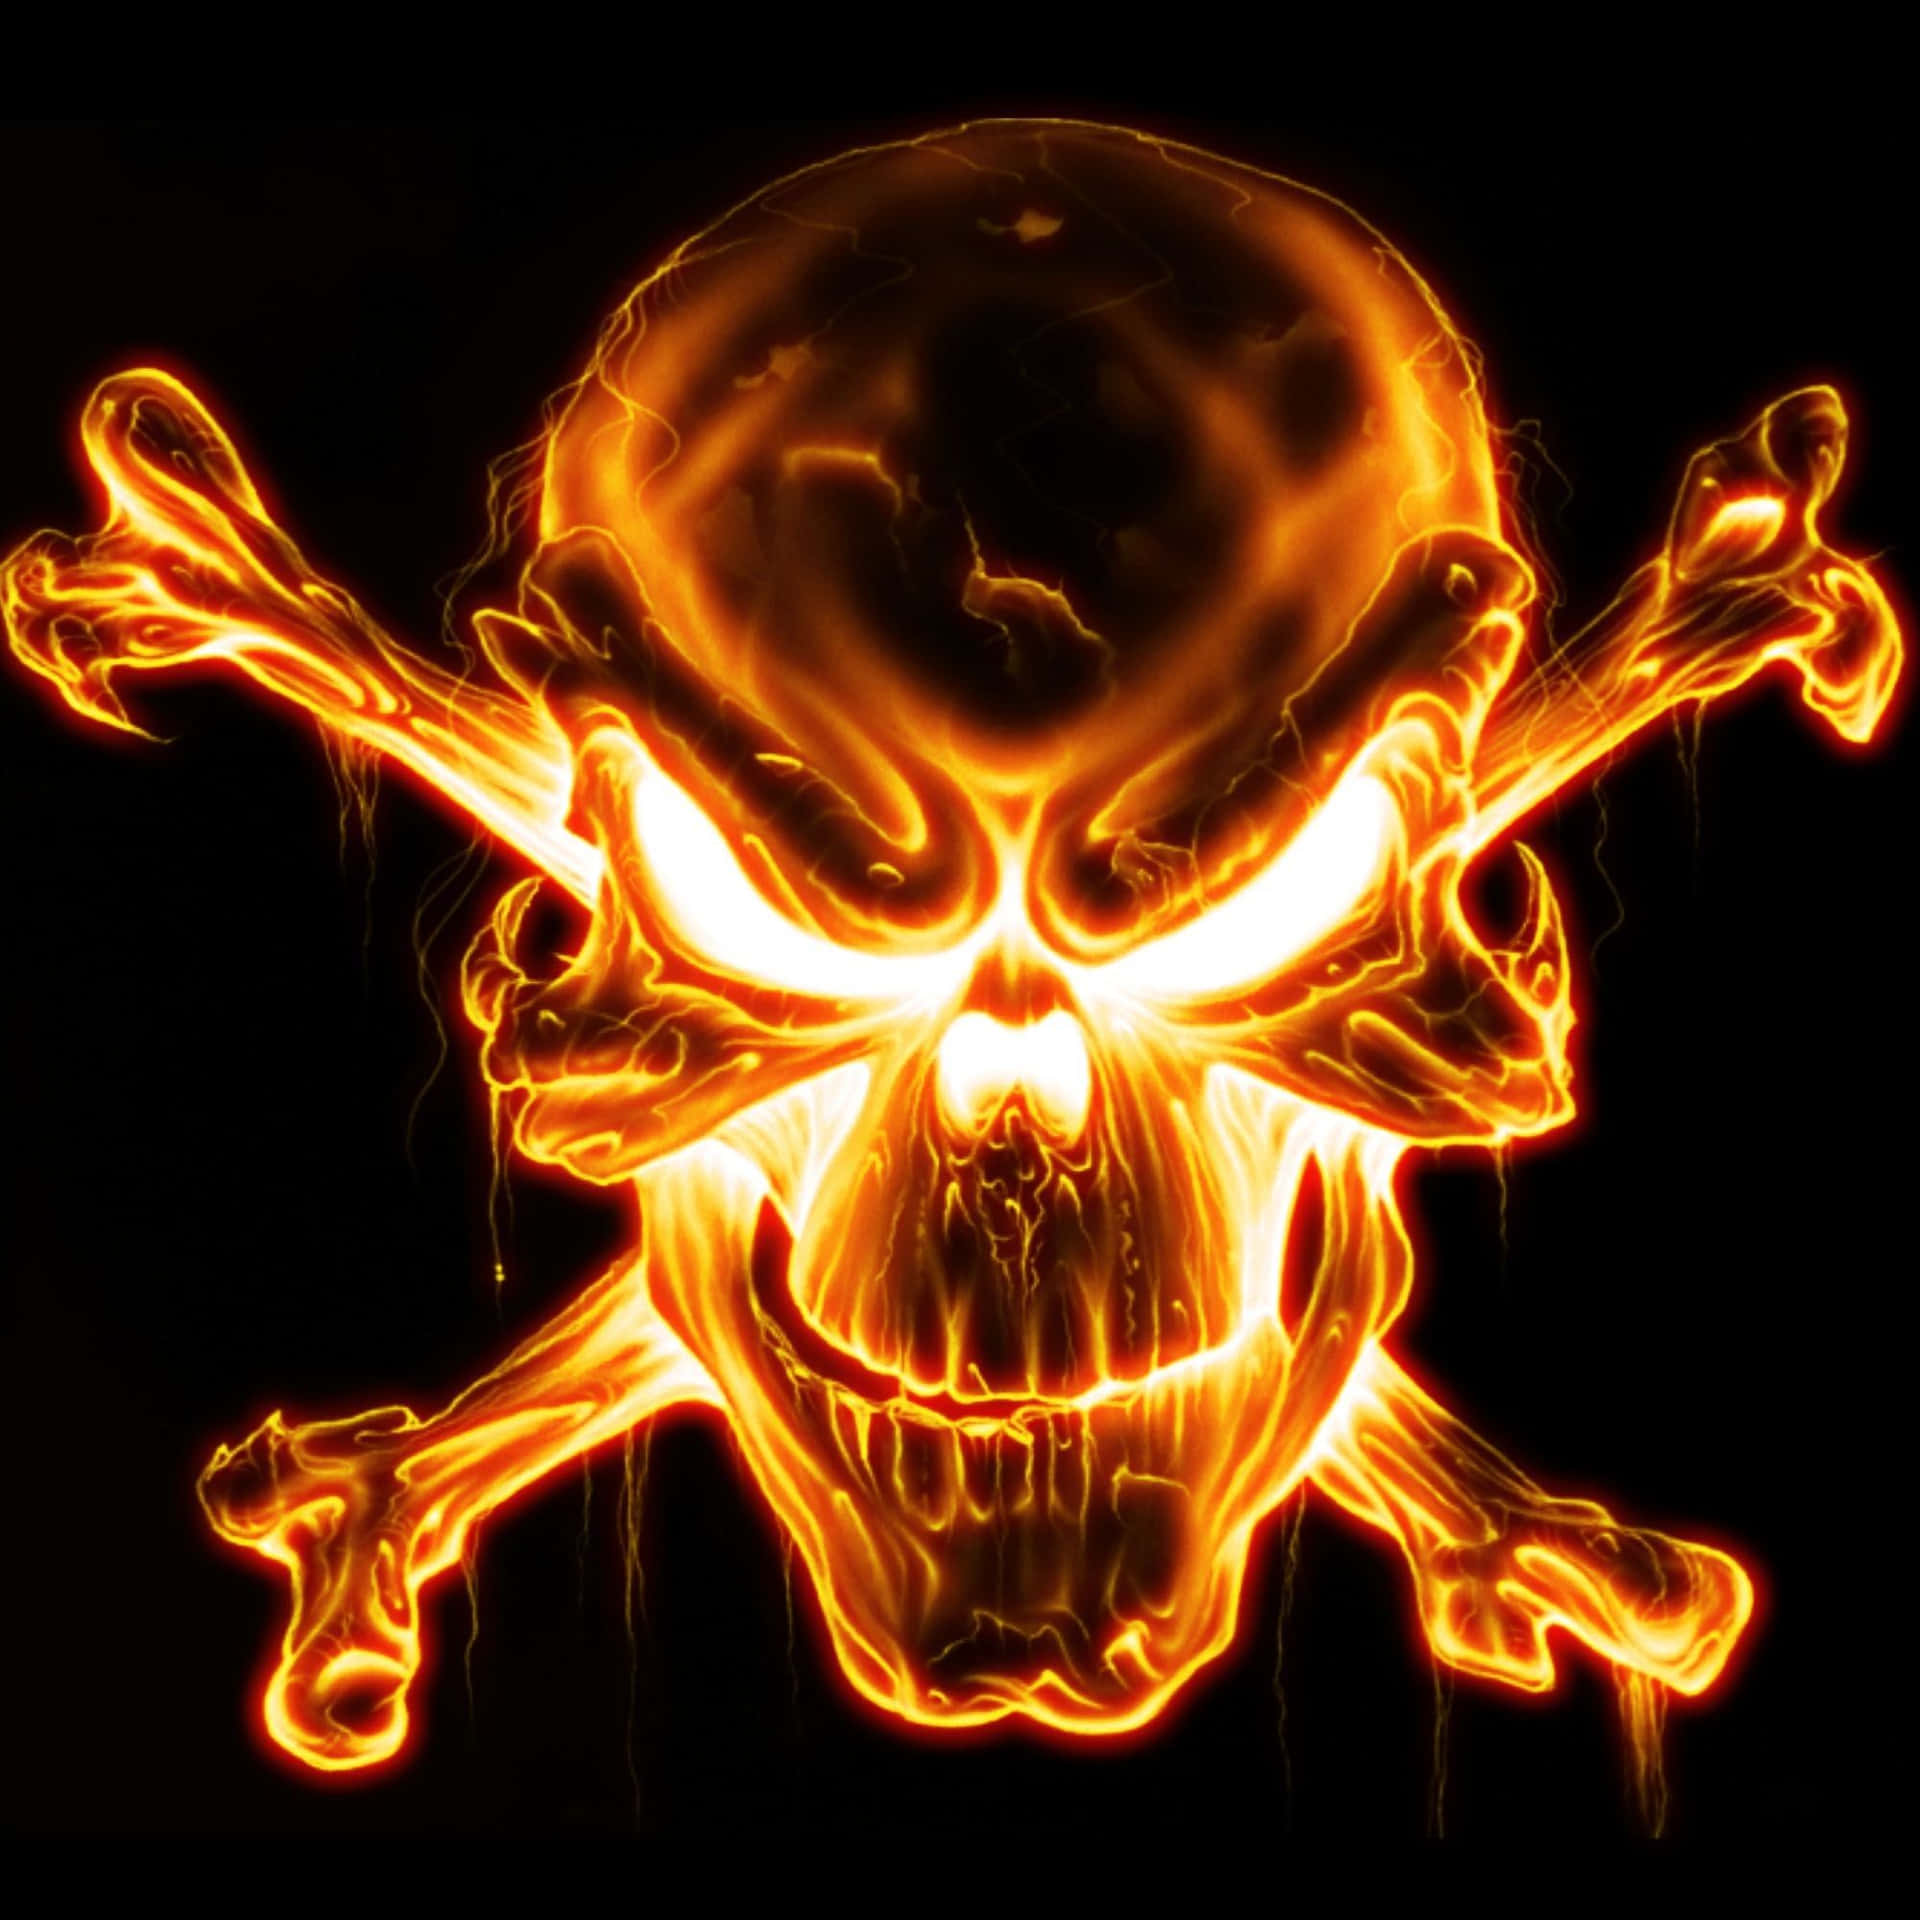 A Skull With Flames And Crossbones On A Black Background Wallpaper